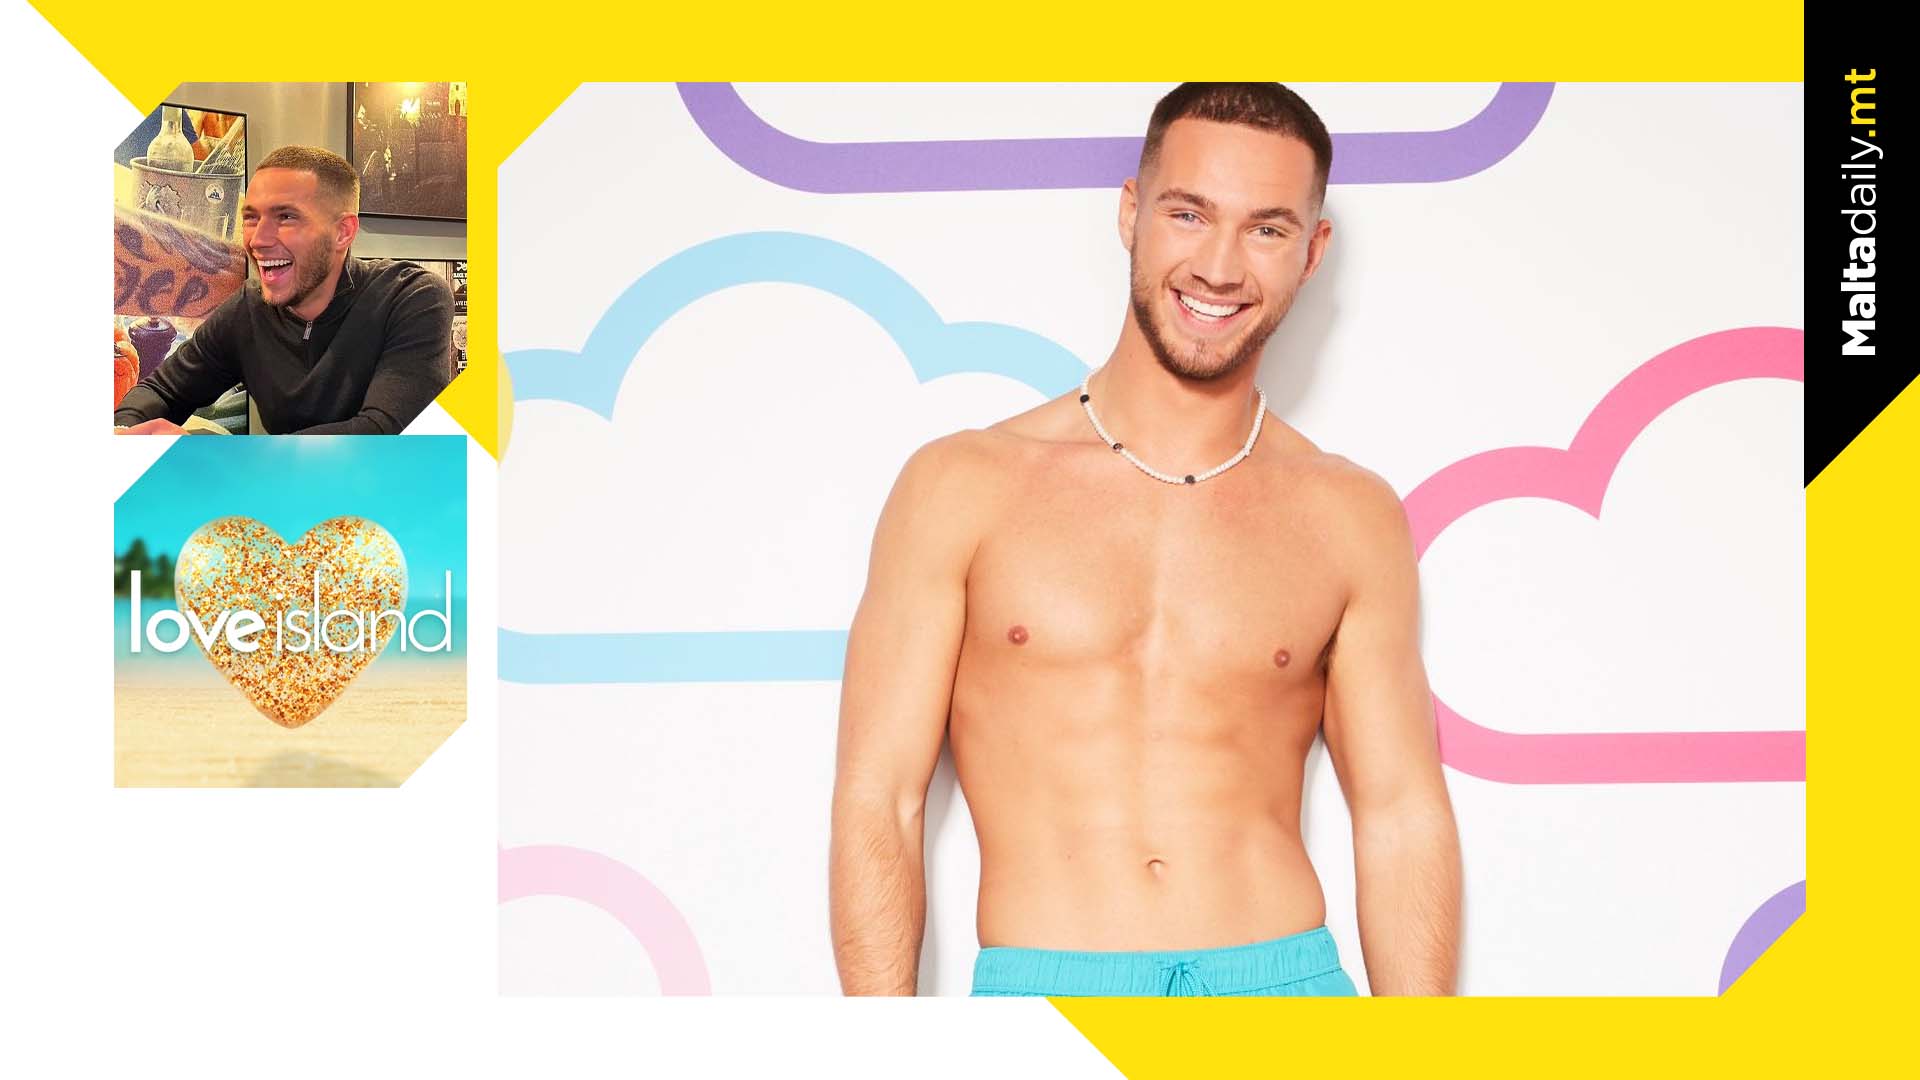 Love Island casts first ever ‘blind’ contestant Ron Hall